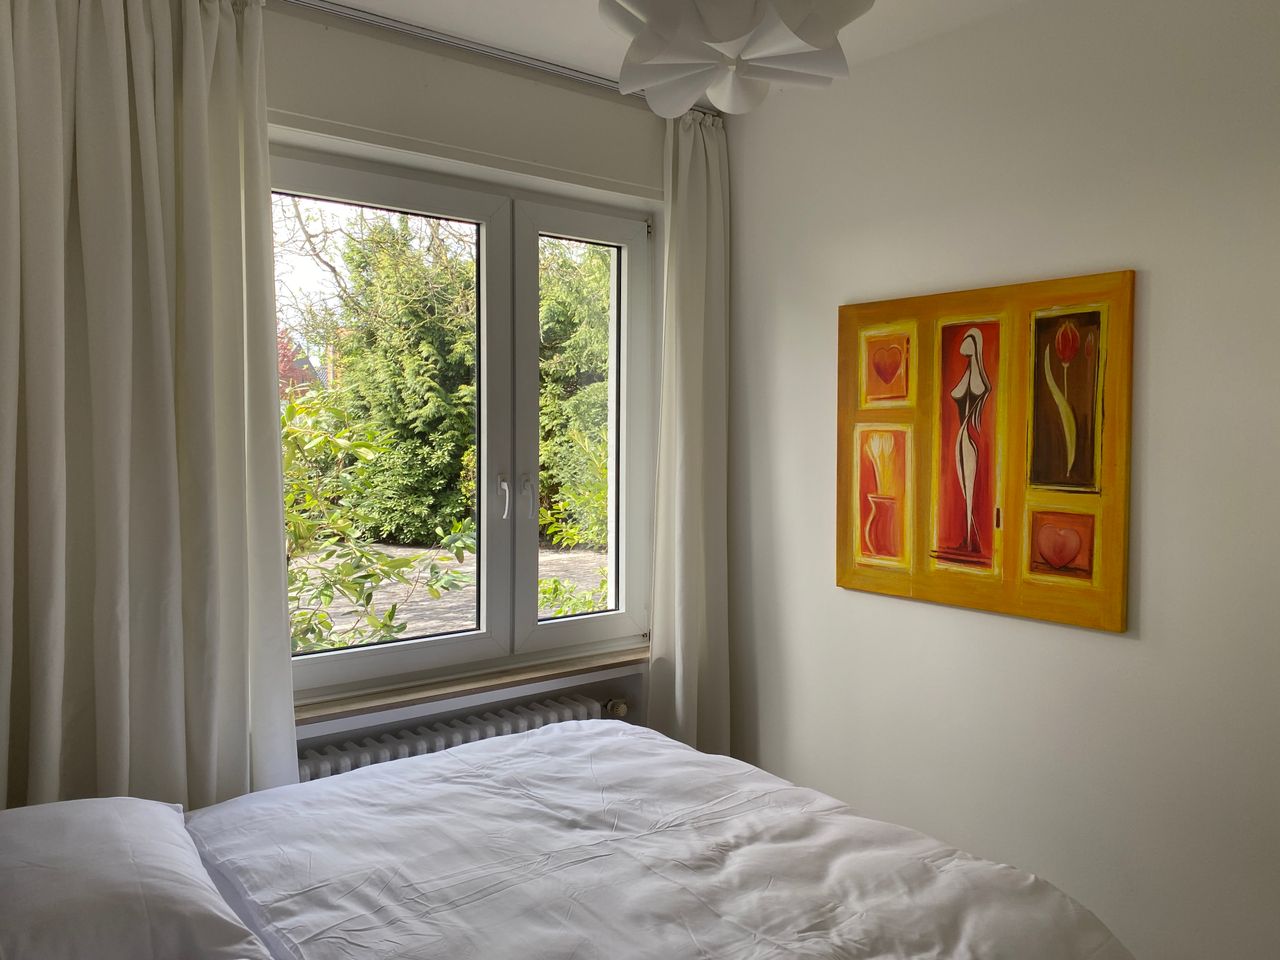 Freshly renovated two-room flat on villa plot, new furniture, 20 minutes from Düsseldorf and Essen